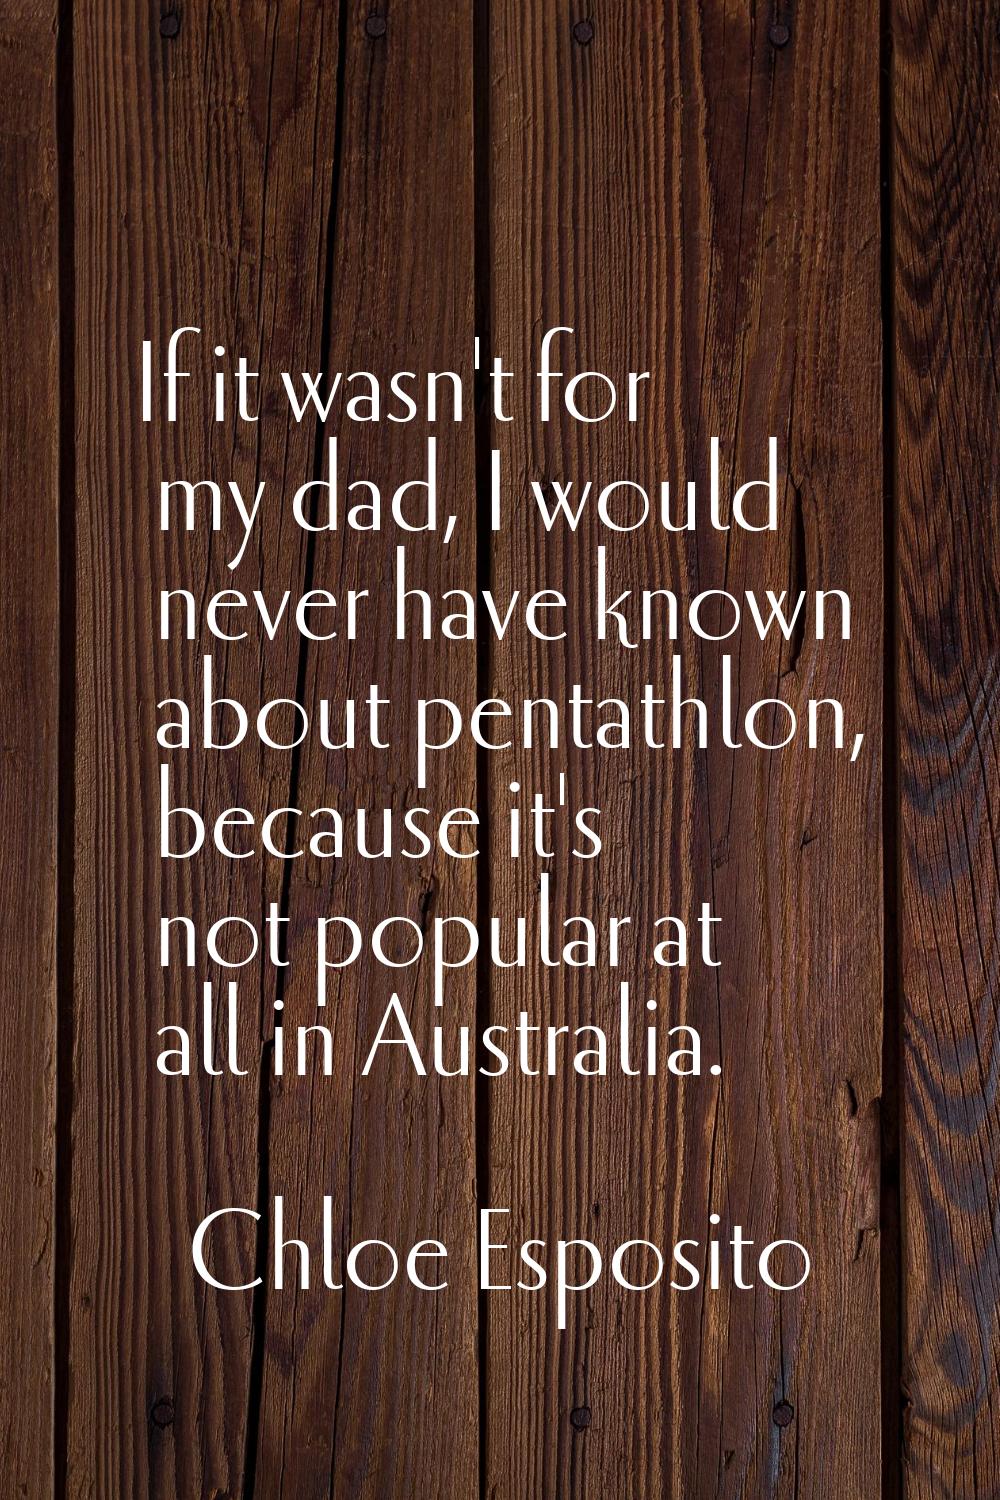 If it wasn't for my dad, I would never have known about pentathlon, because it's not popular at all